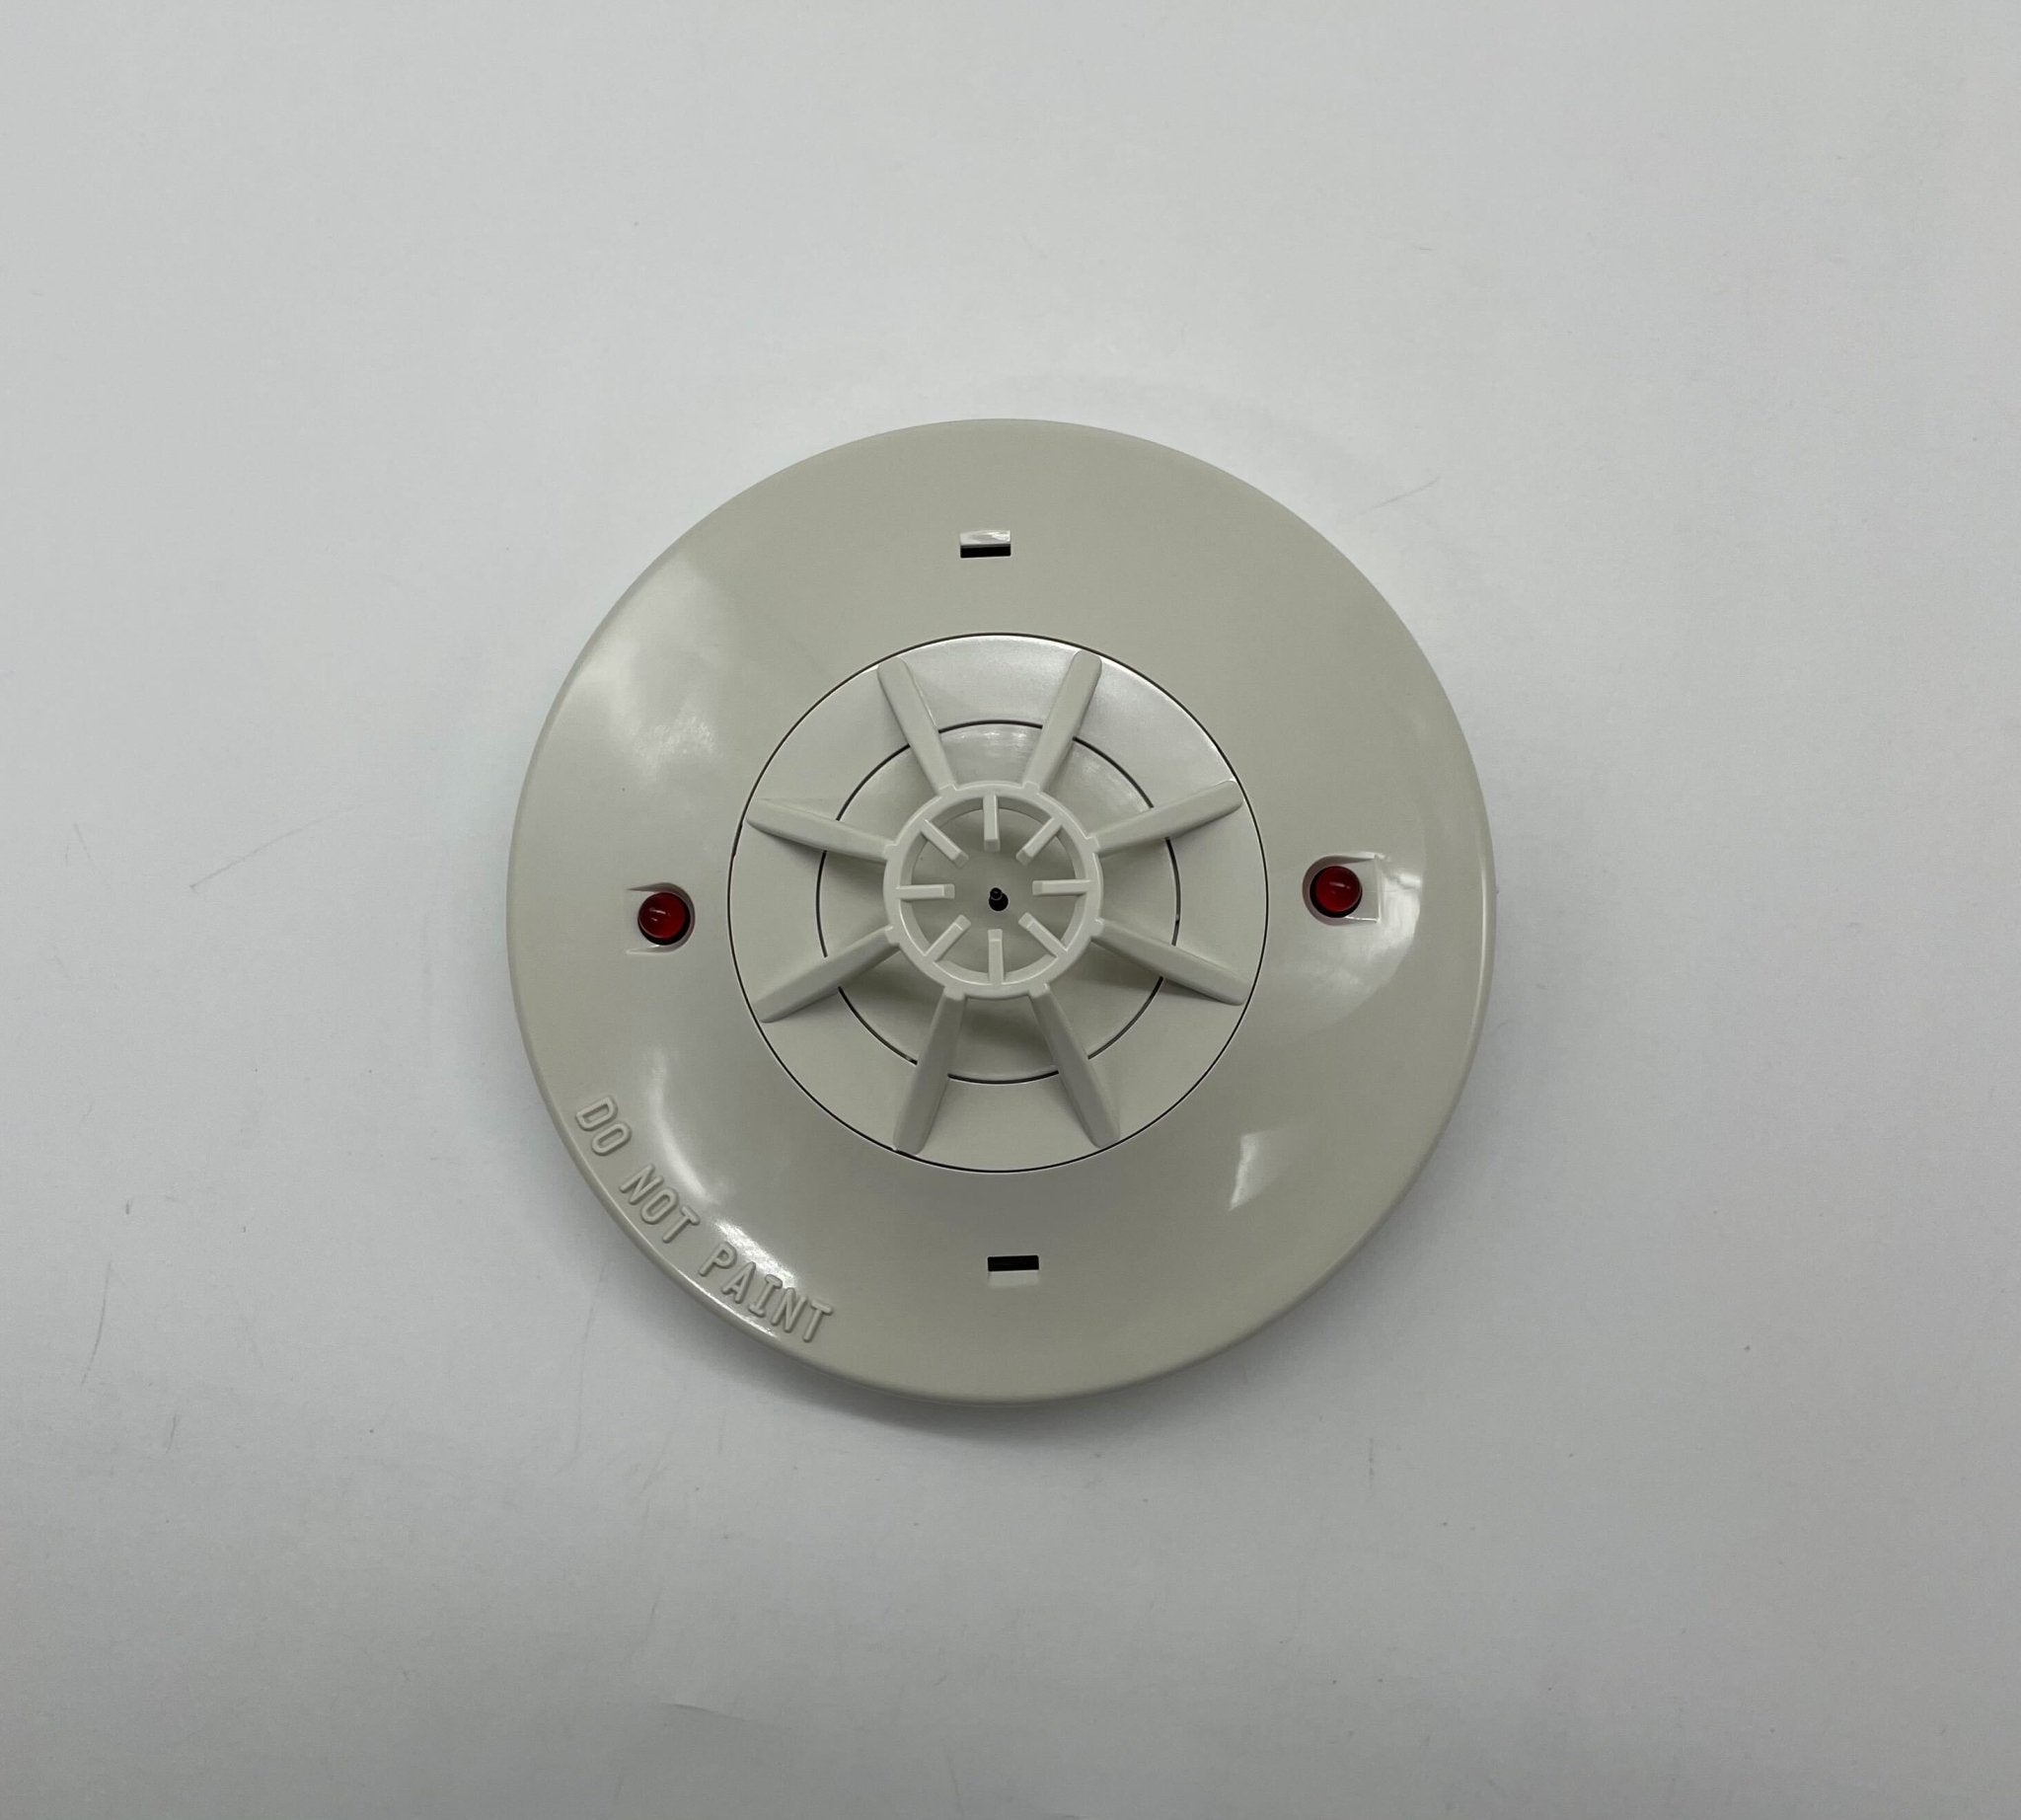 Potter FHA - The Fire Alarm Supplier